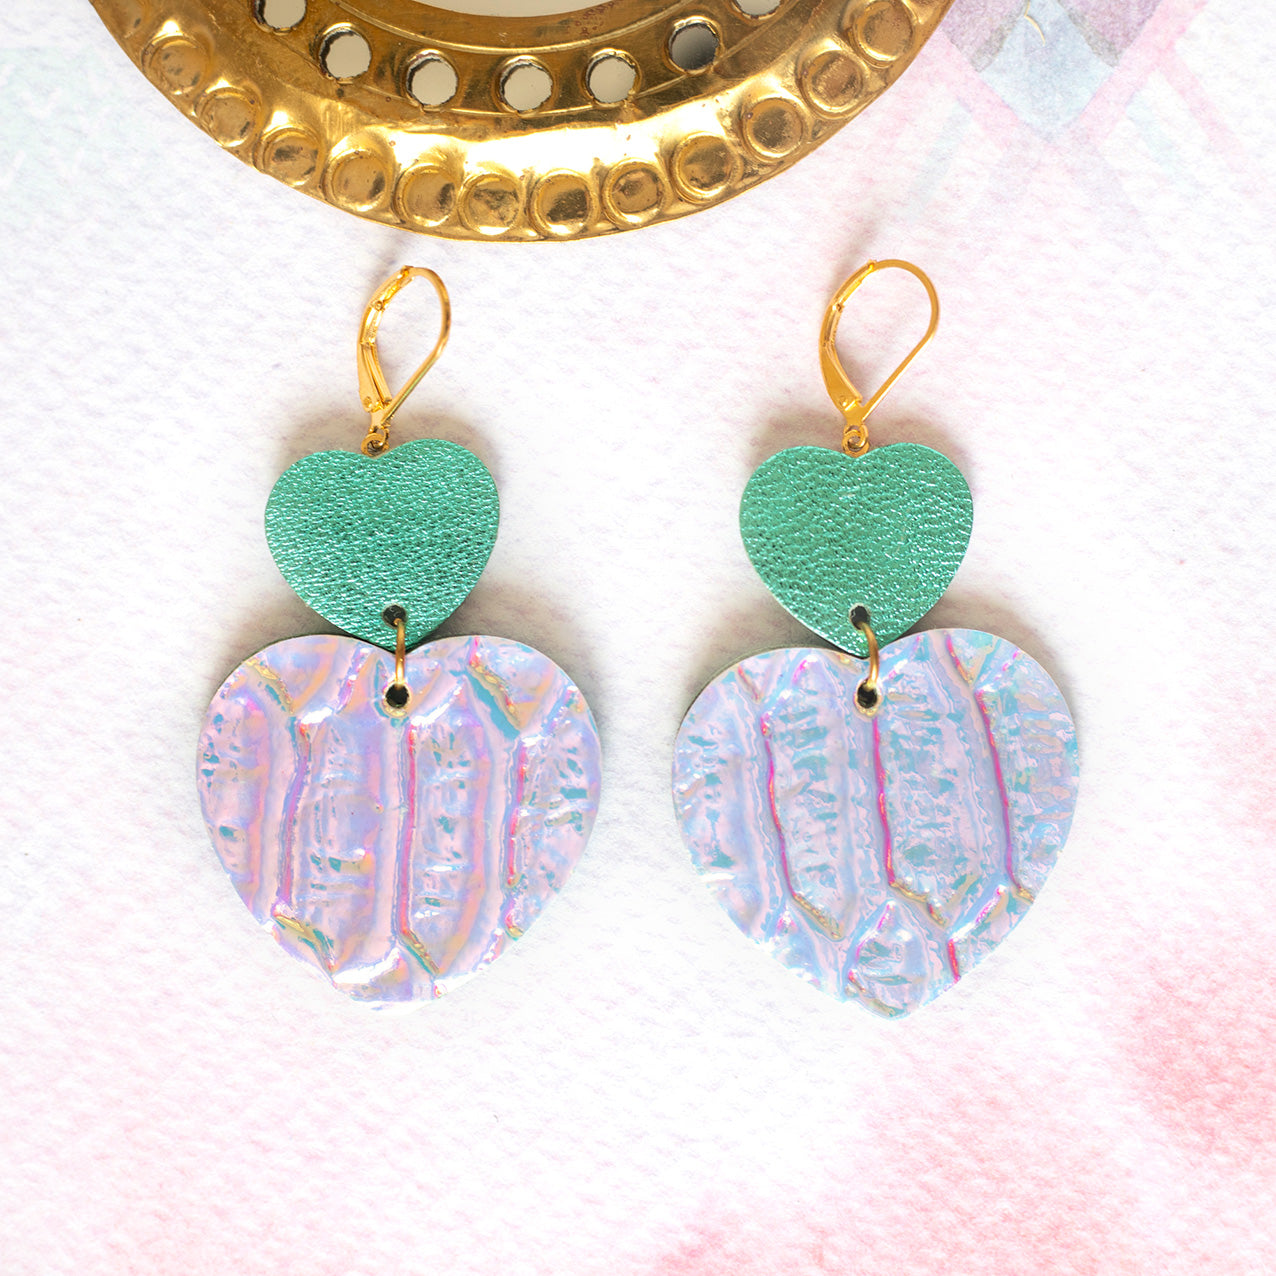 Double Hearts earrings - metallic turquoise leather and light blue holographic